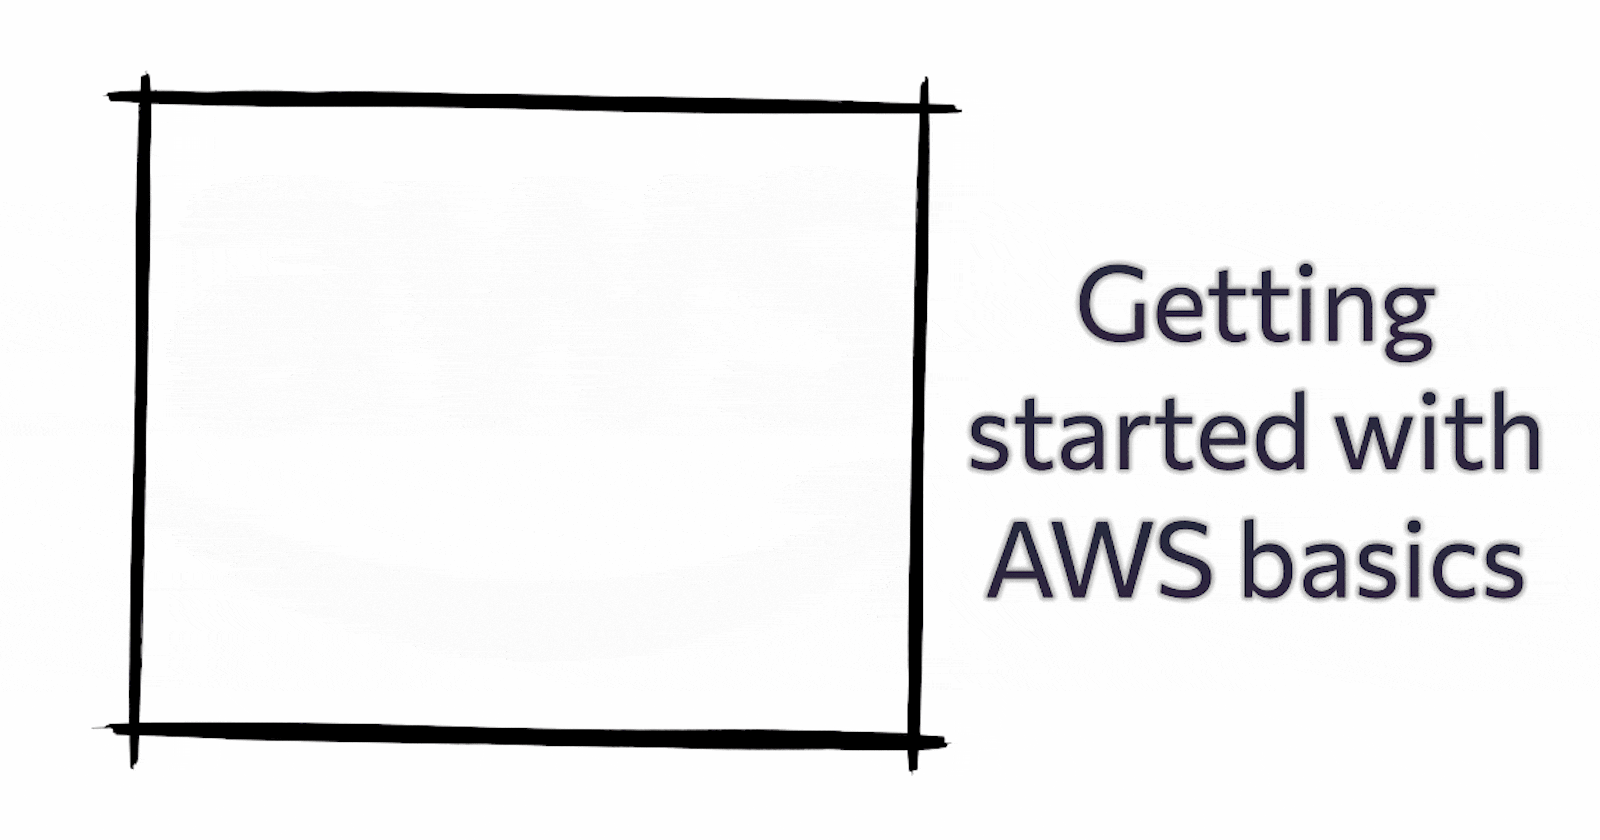 How to Master AWS Basics for DevOps Learners - A Step-by-Step Guide: Day 38 of 90 Days of DevOps